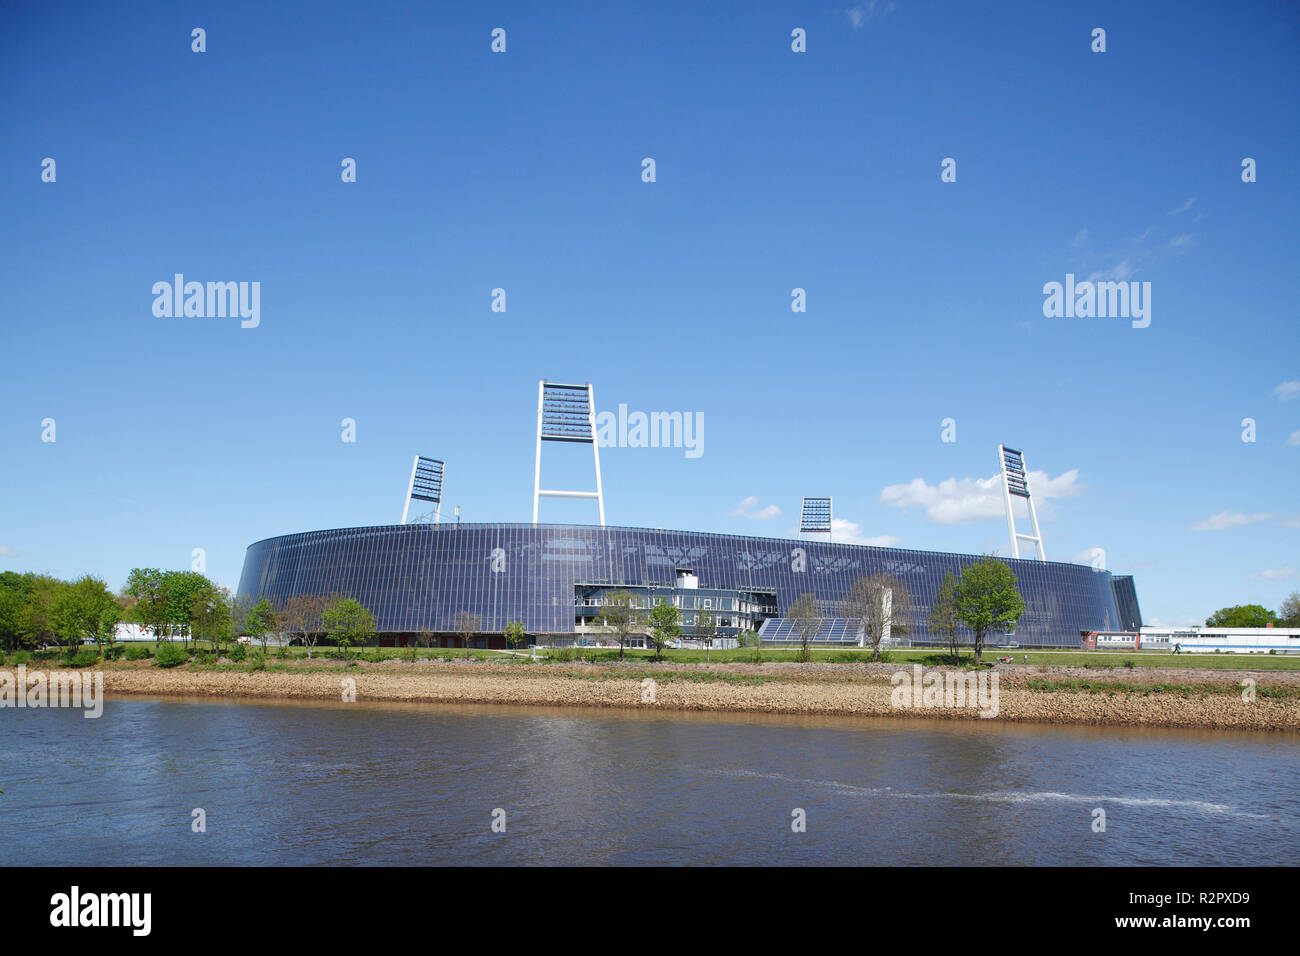 Weserstadion' football stadium with Weser River and cycle path, Bremen, Germany, Europe Stock Photo